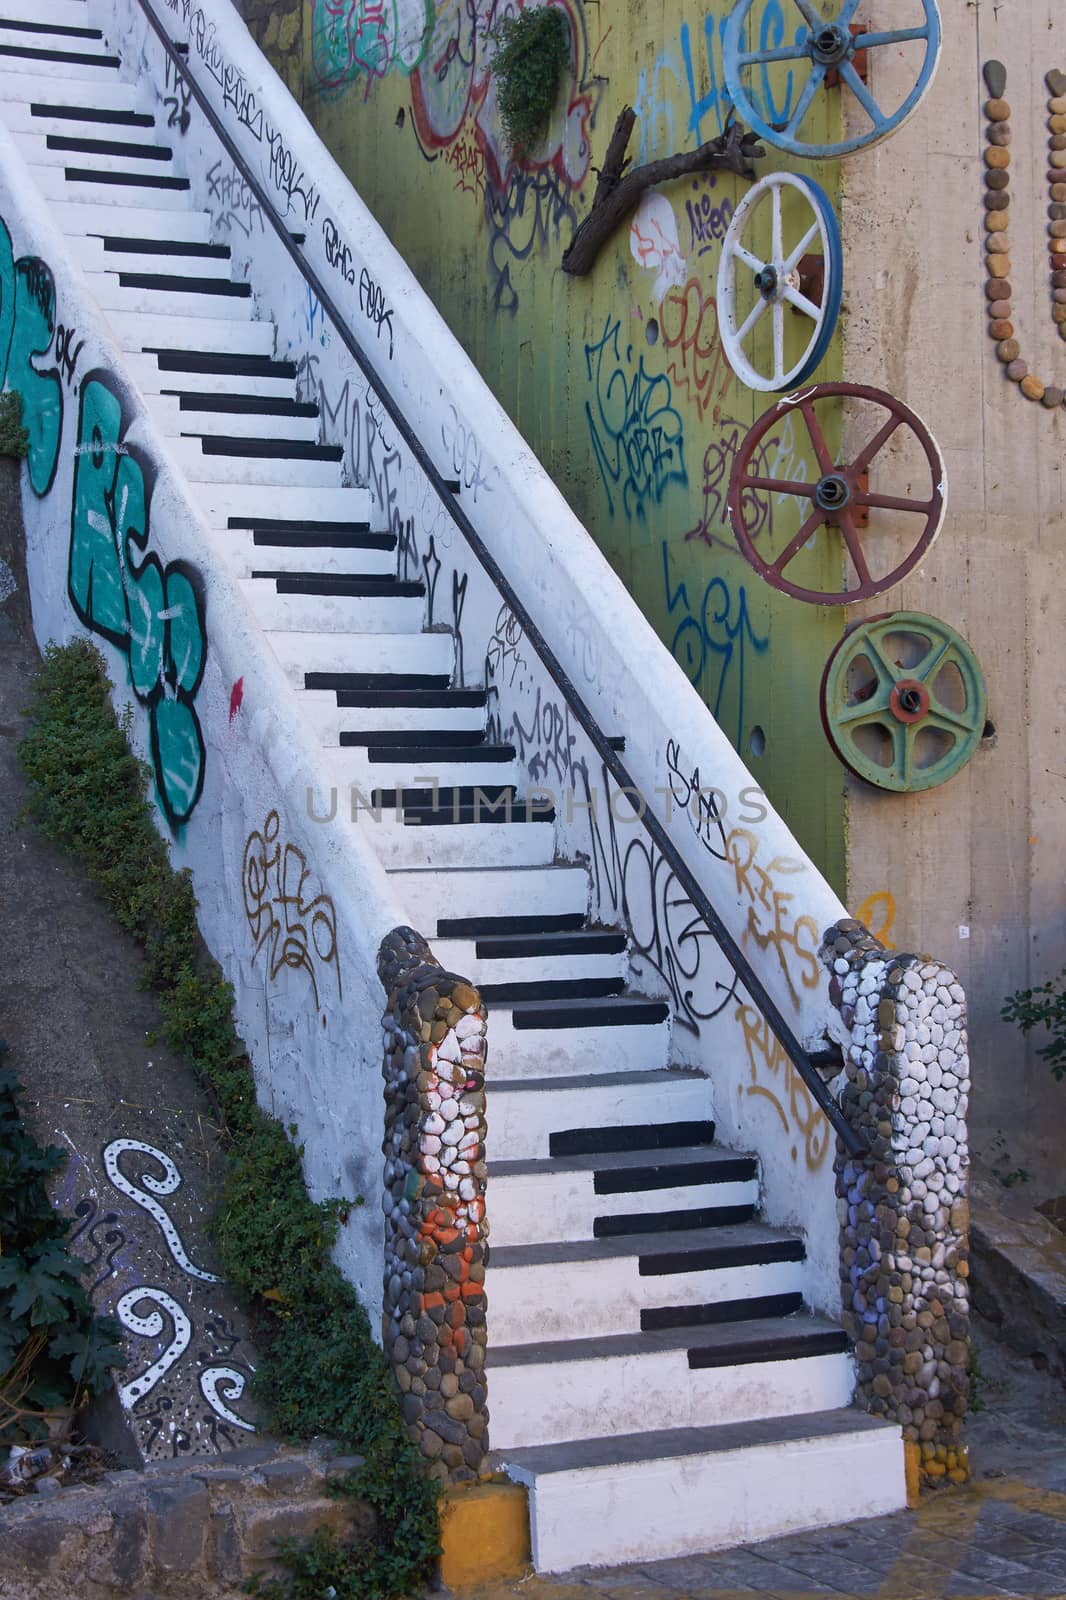 Stairway decorated to look like the keyboard of a piano in the UNESCO World Heritage port city of Valparaiso, Chile.